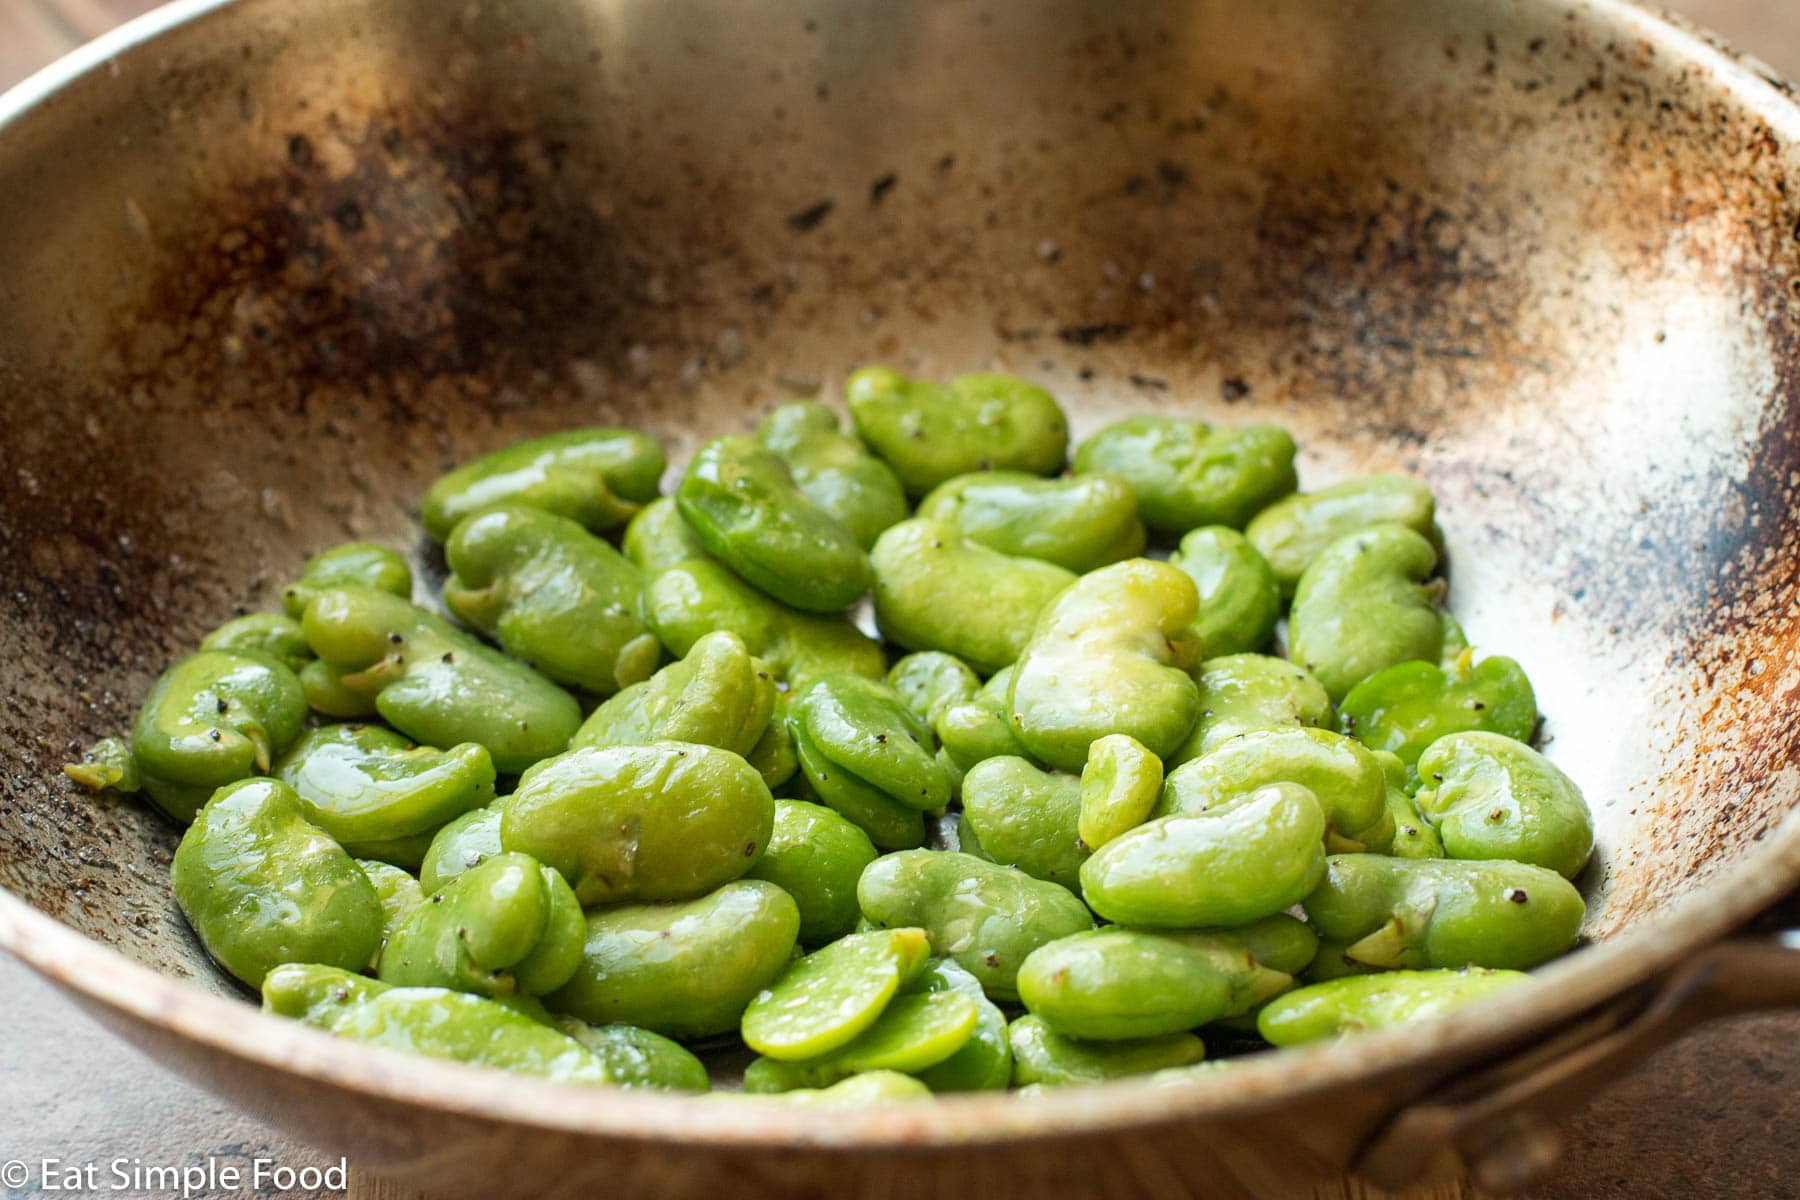 Bright green Fava (AKA Lima) Beans cooked in a stainless steel pan. Close up